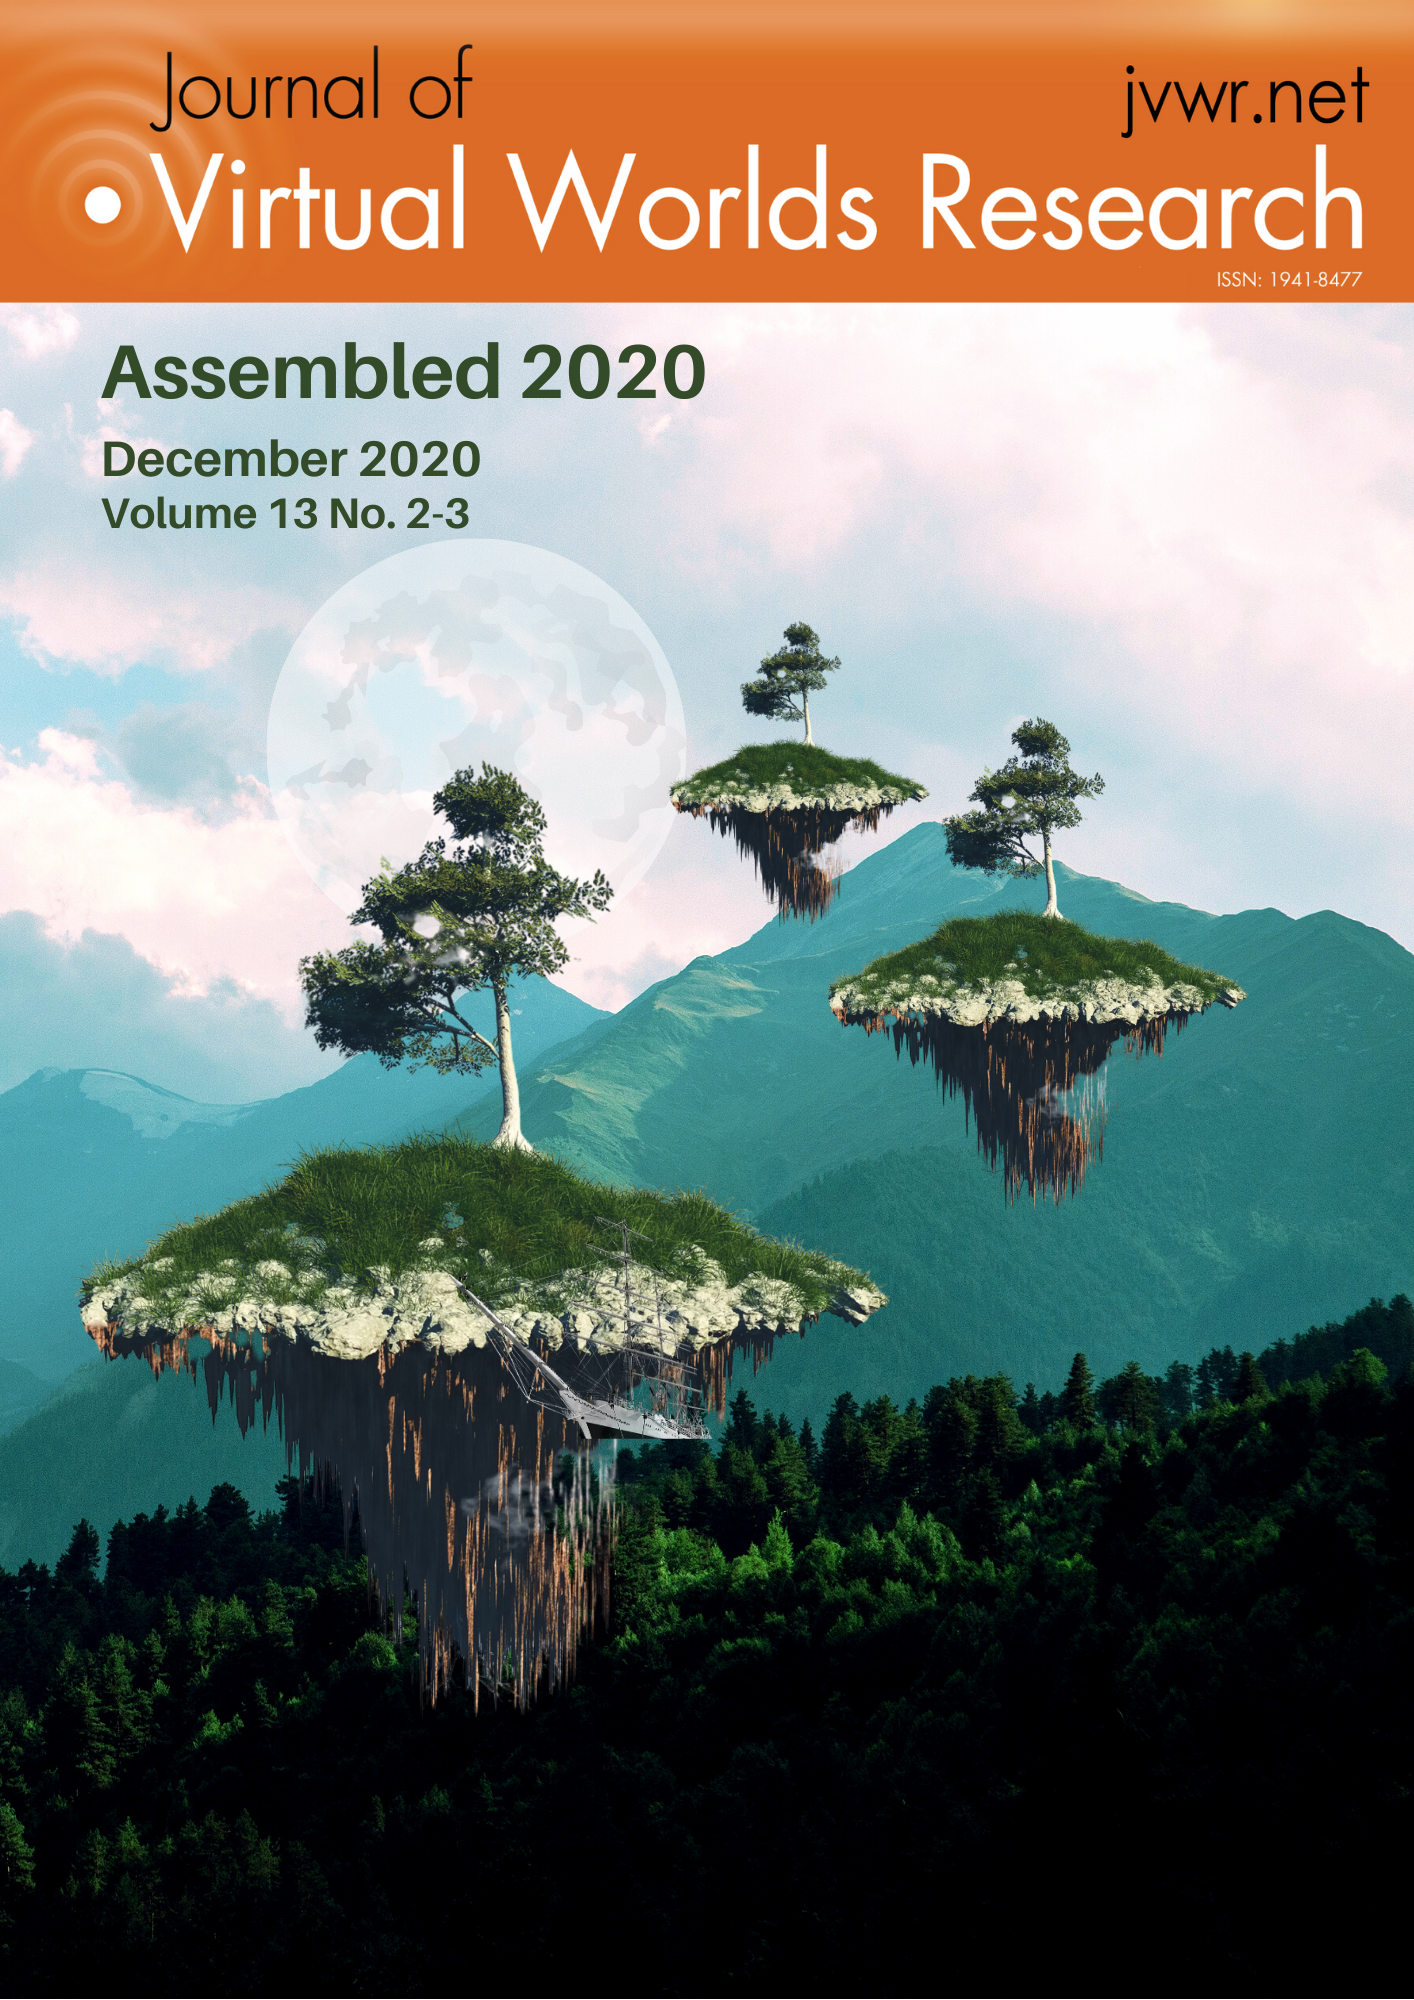 Assembled 2020 Vol. 13 No. 2-3 The JVWR Issue cover